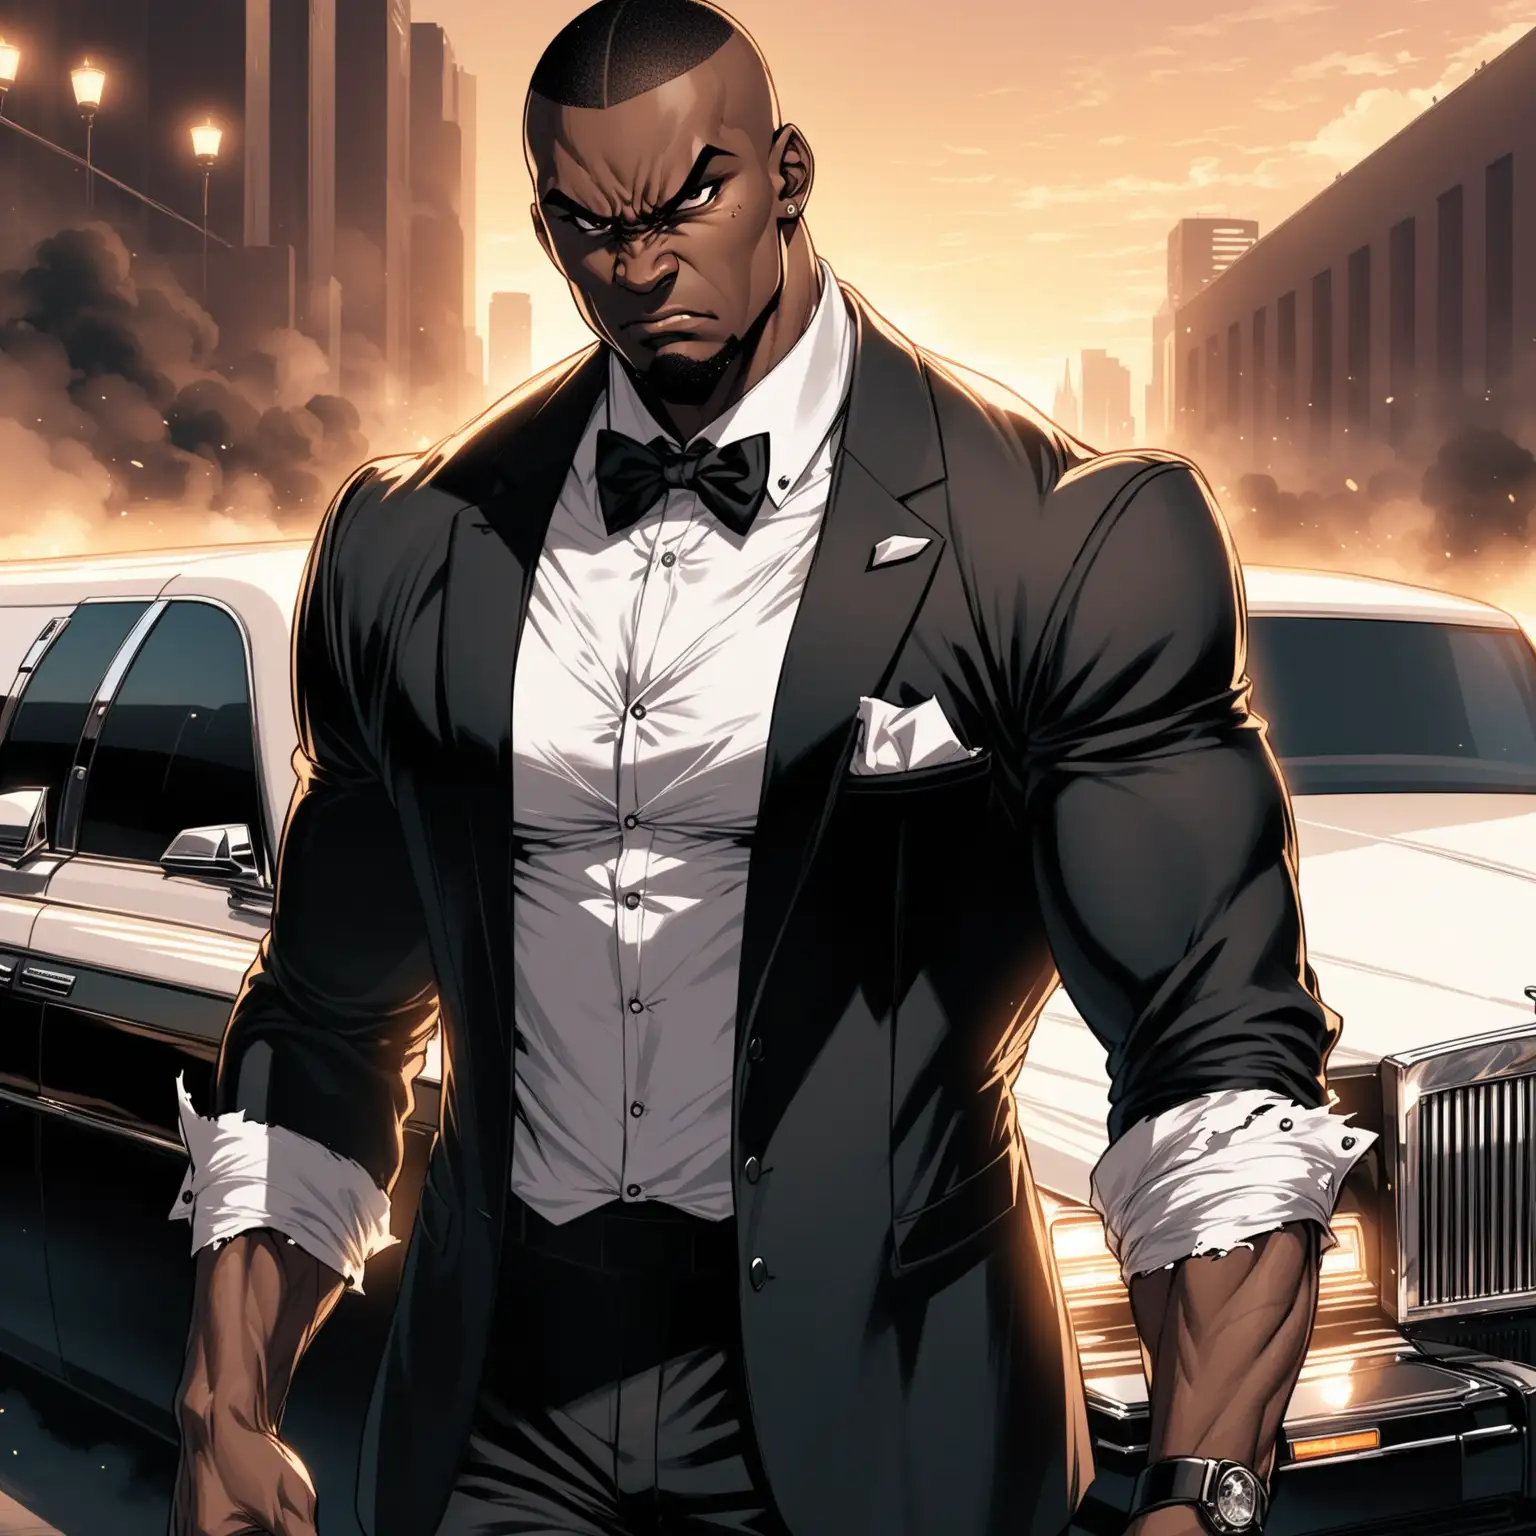 Angry Black Male Limo Driver with Ripped Sleeves Ready for Action